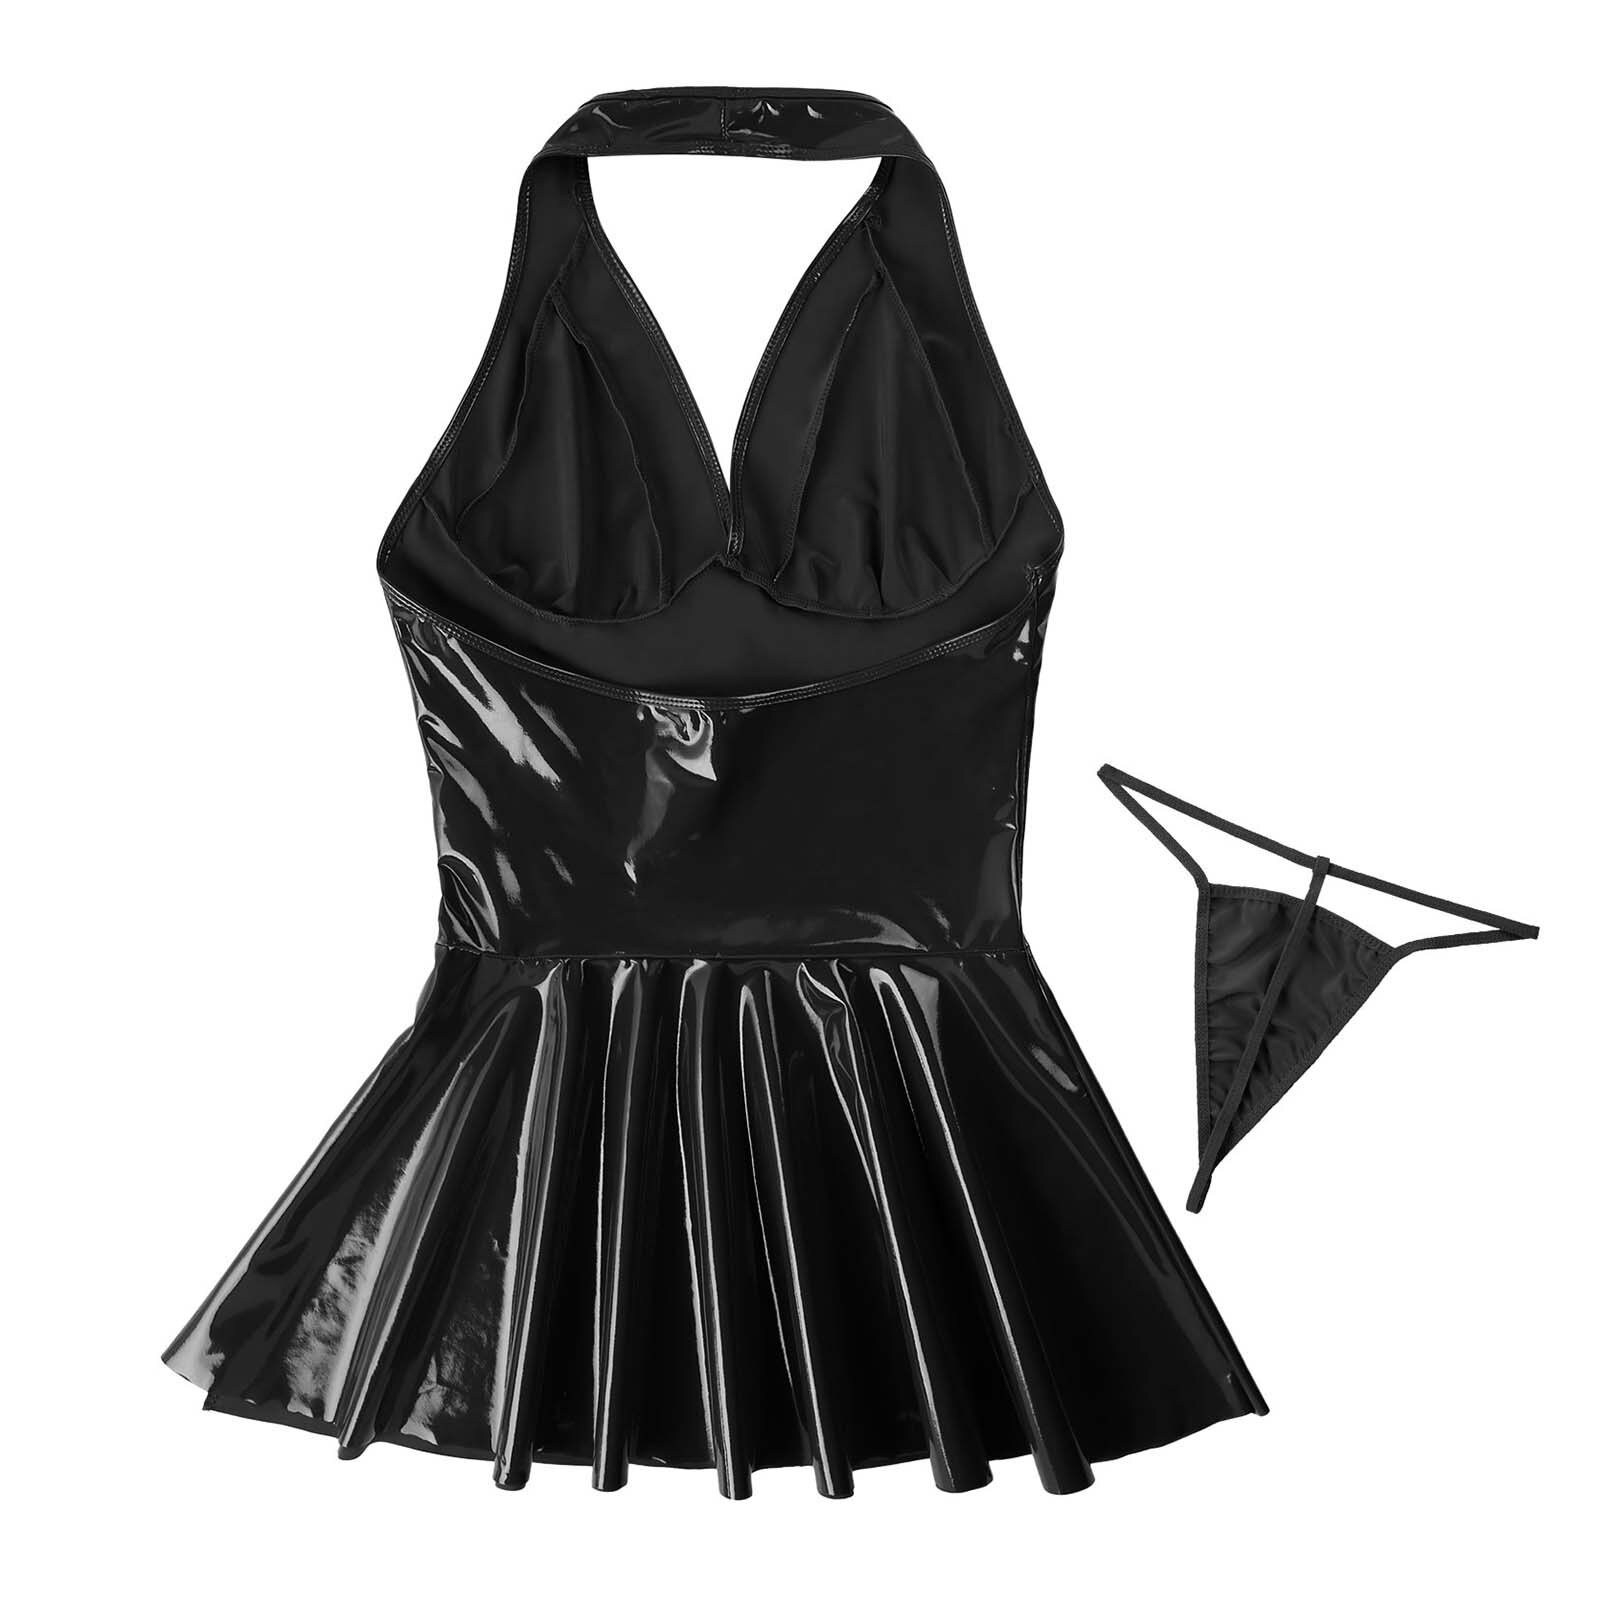 Womens Ladies Faux Leather Pleated Mini Dress Sleeveless Backless Wet Look Dress A-line Sexy Clubwear Costumes Cocktail Parties